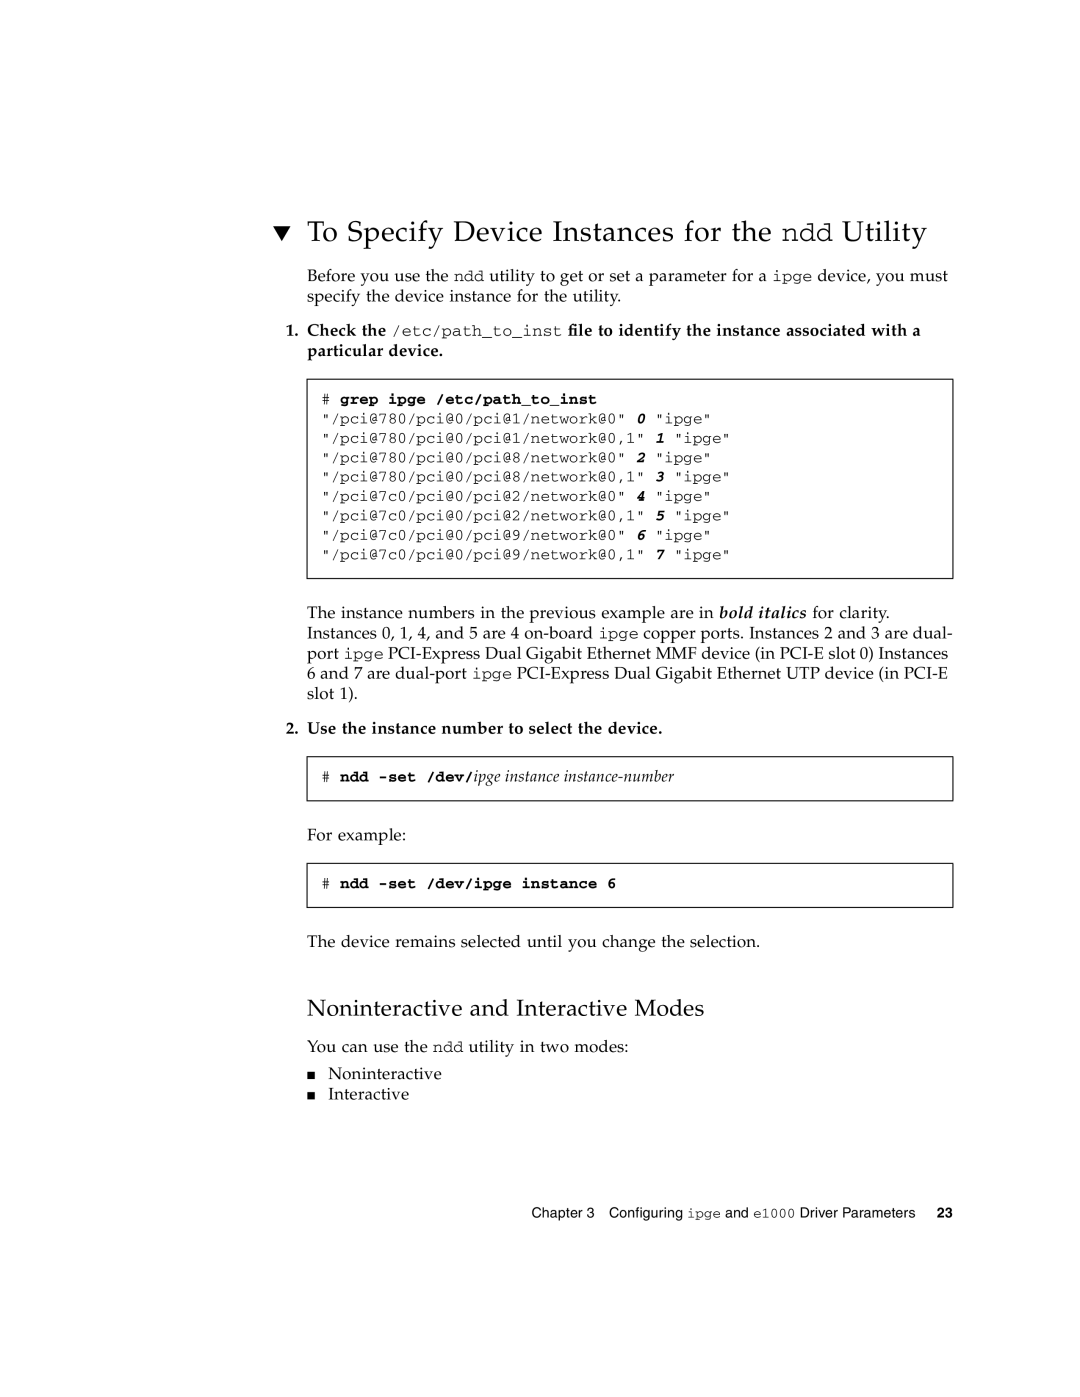 Sun Microsystems Gigabit Ethernet MMF/UTP Adapter manual To Specify Device Instances for the ndd Utility 